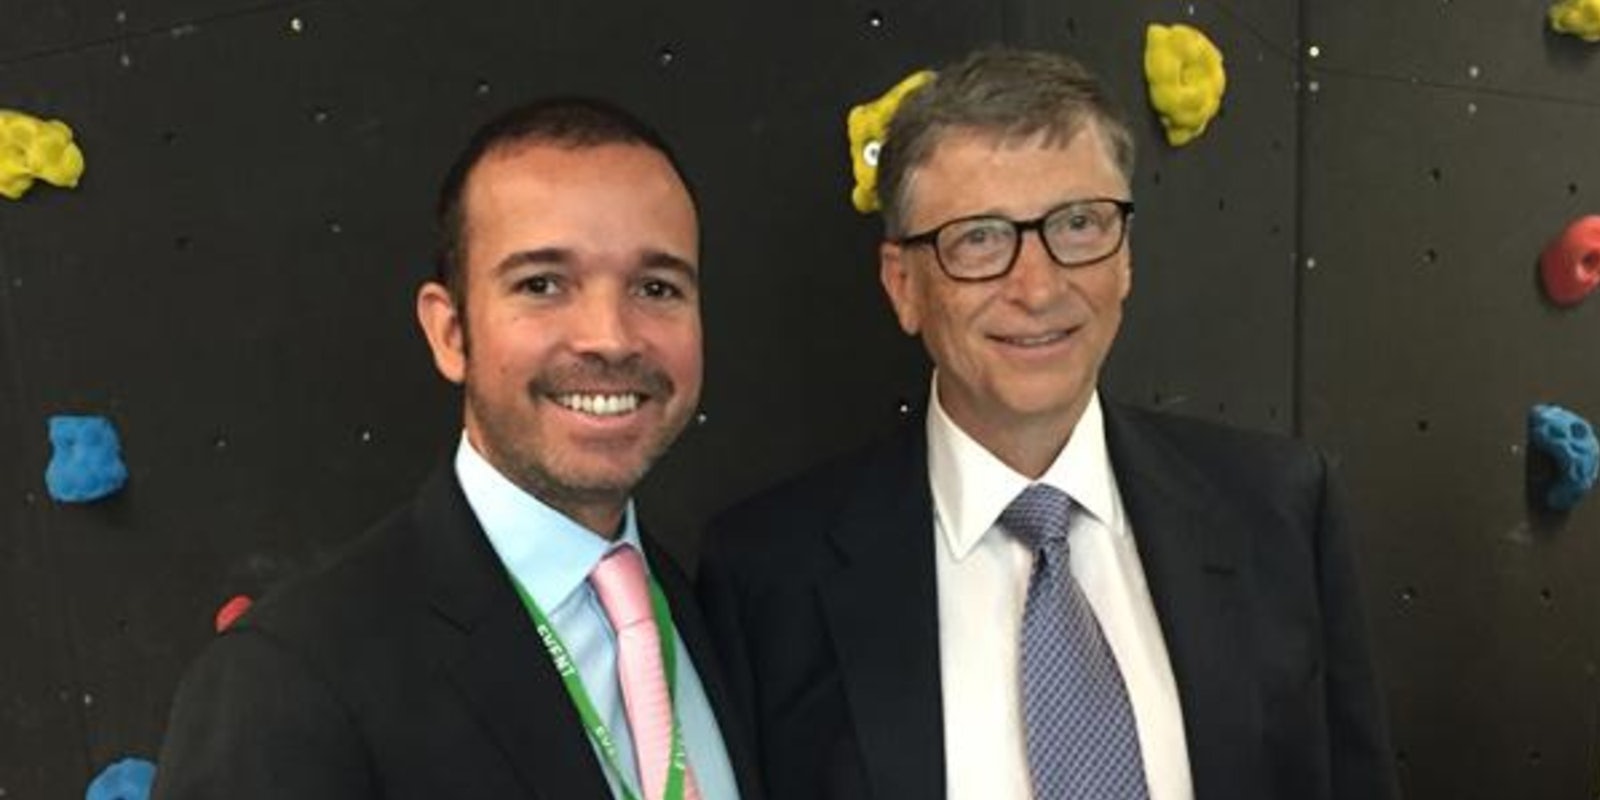 Bill Gates and the CEO of Smartmatic